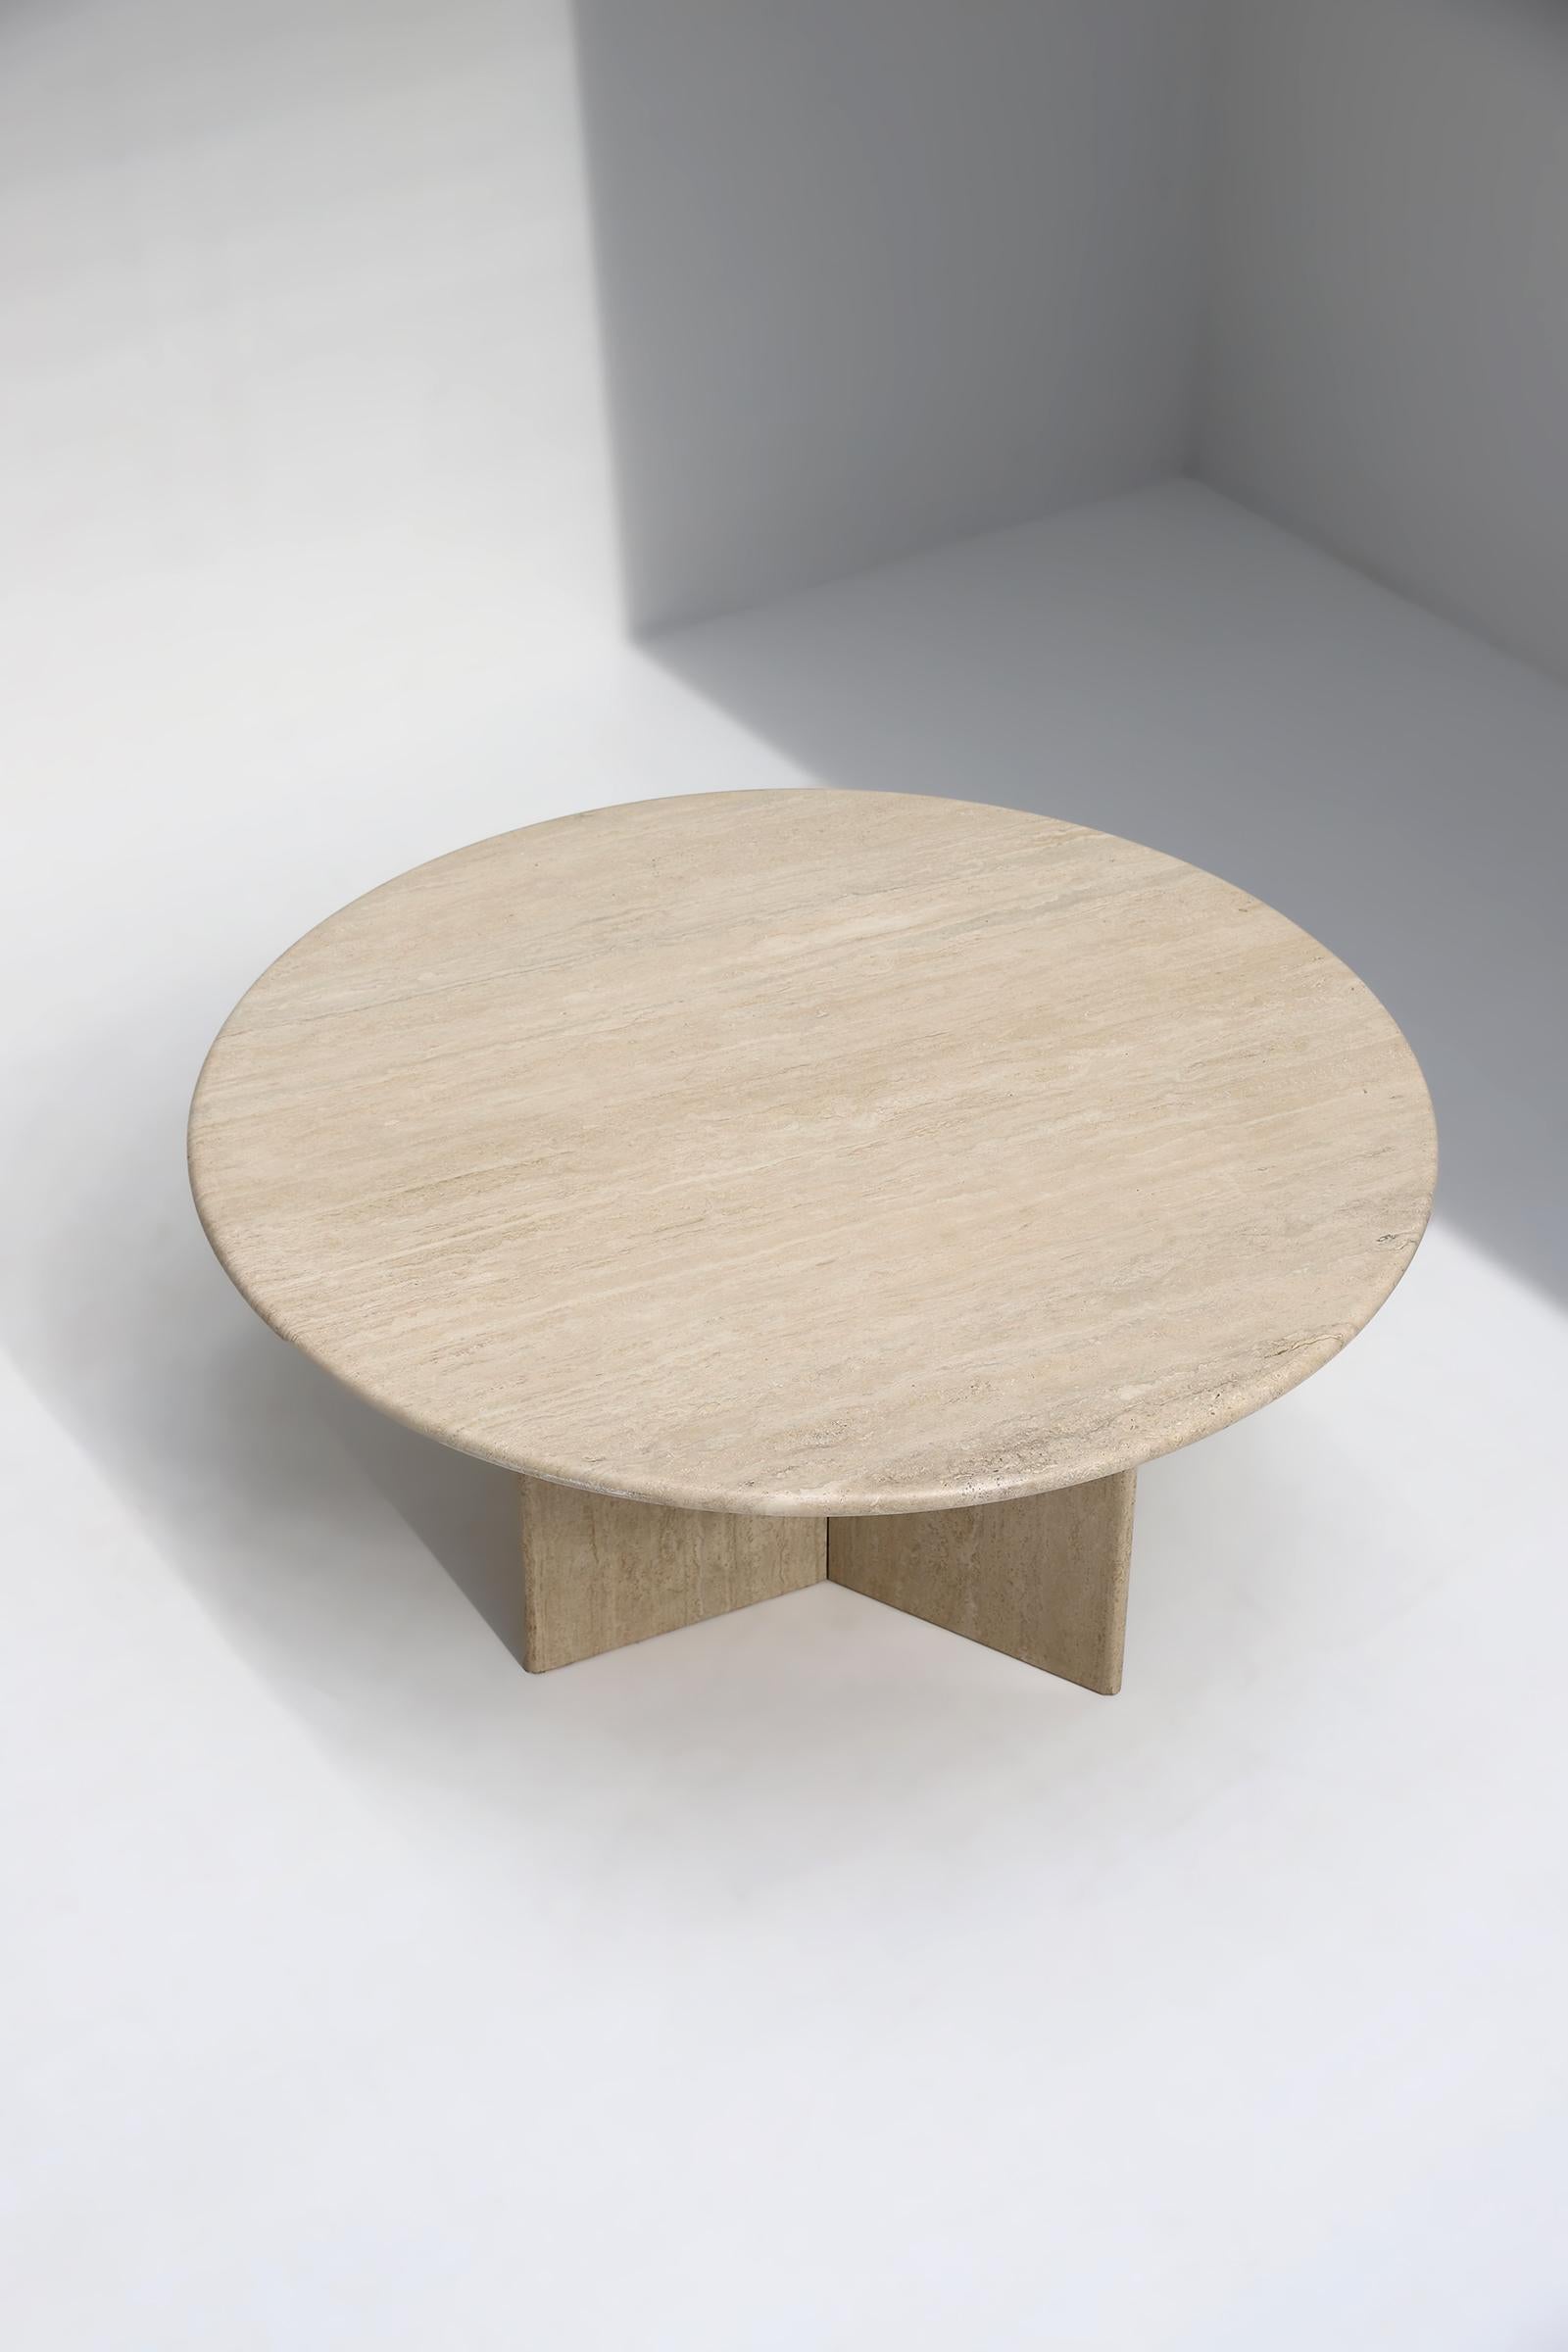 Late 20th Century Decorative Travertine Dining Table Designed in the 1970s